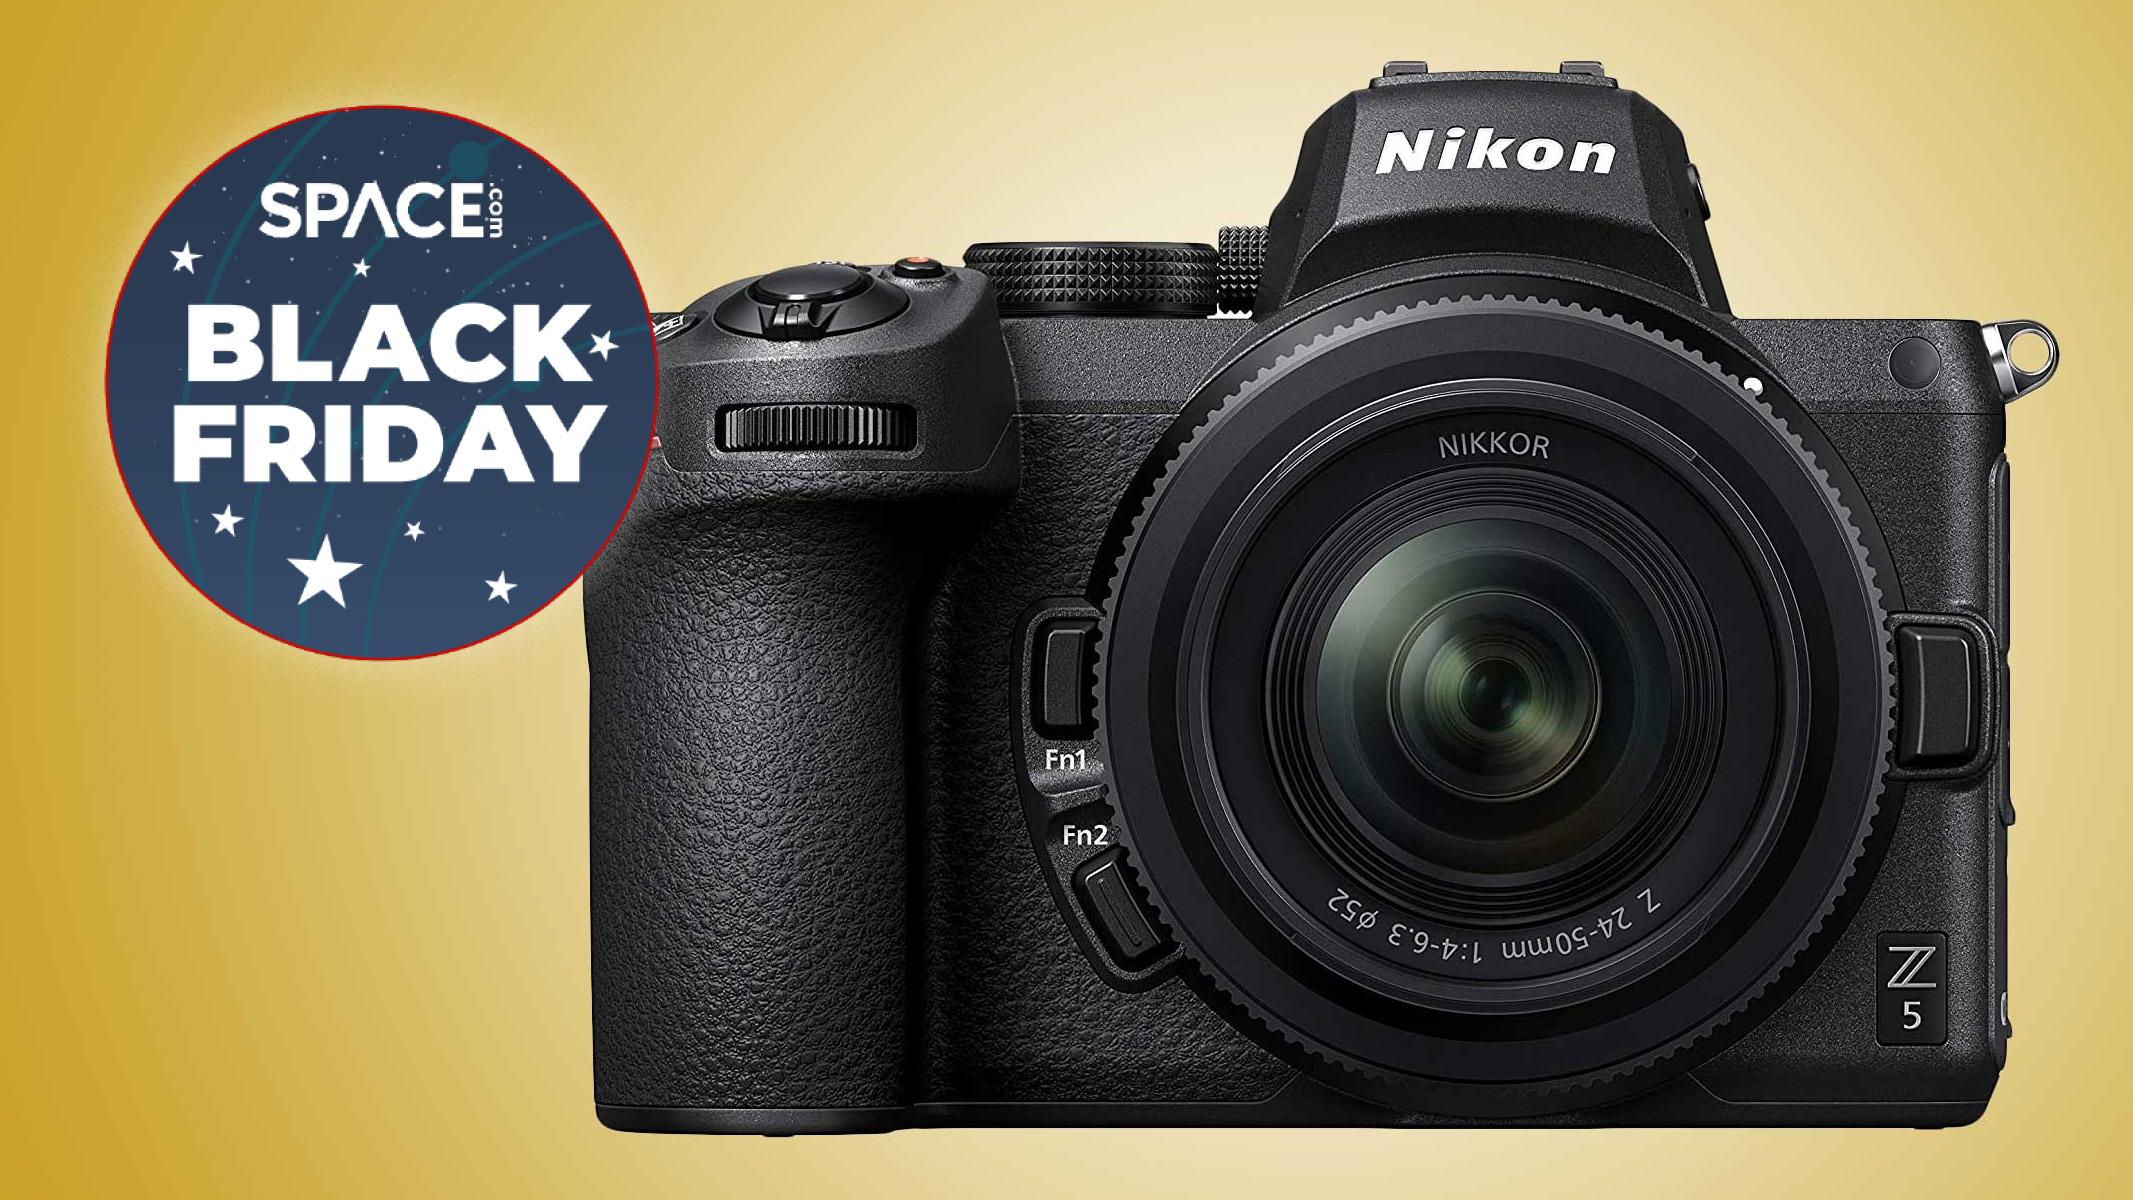 Save $100 on the Nikon Z5 in this Black Friday mirrorless camera deal Space